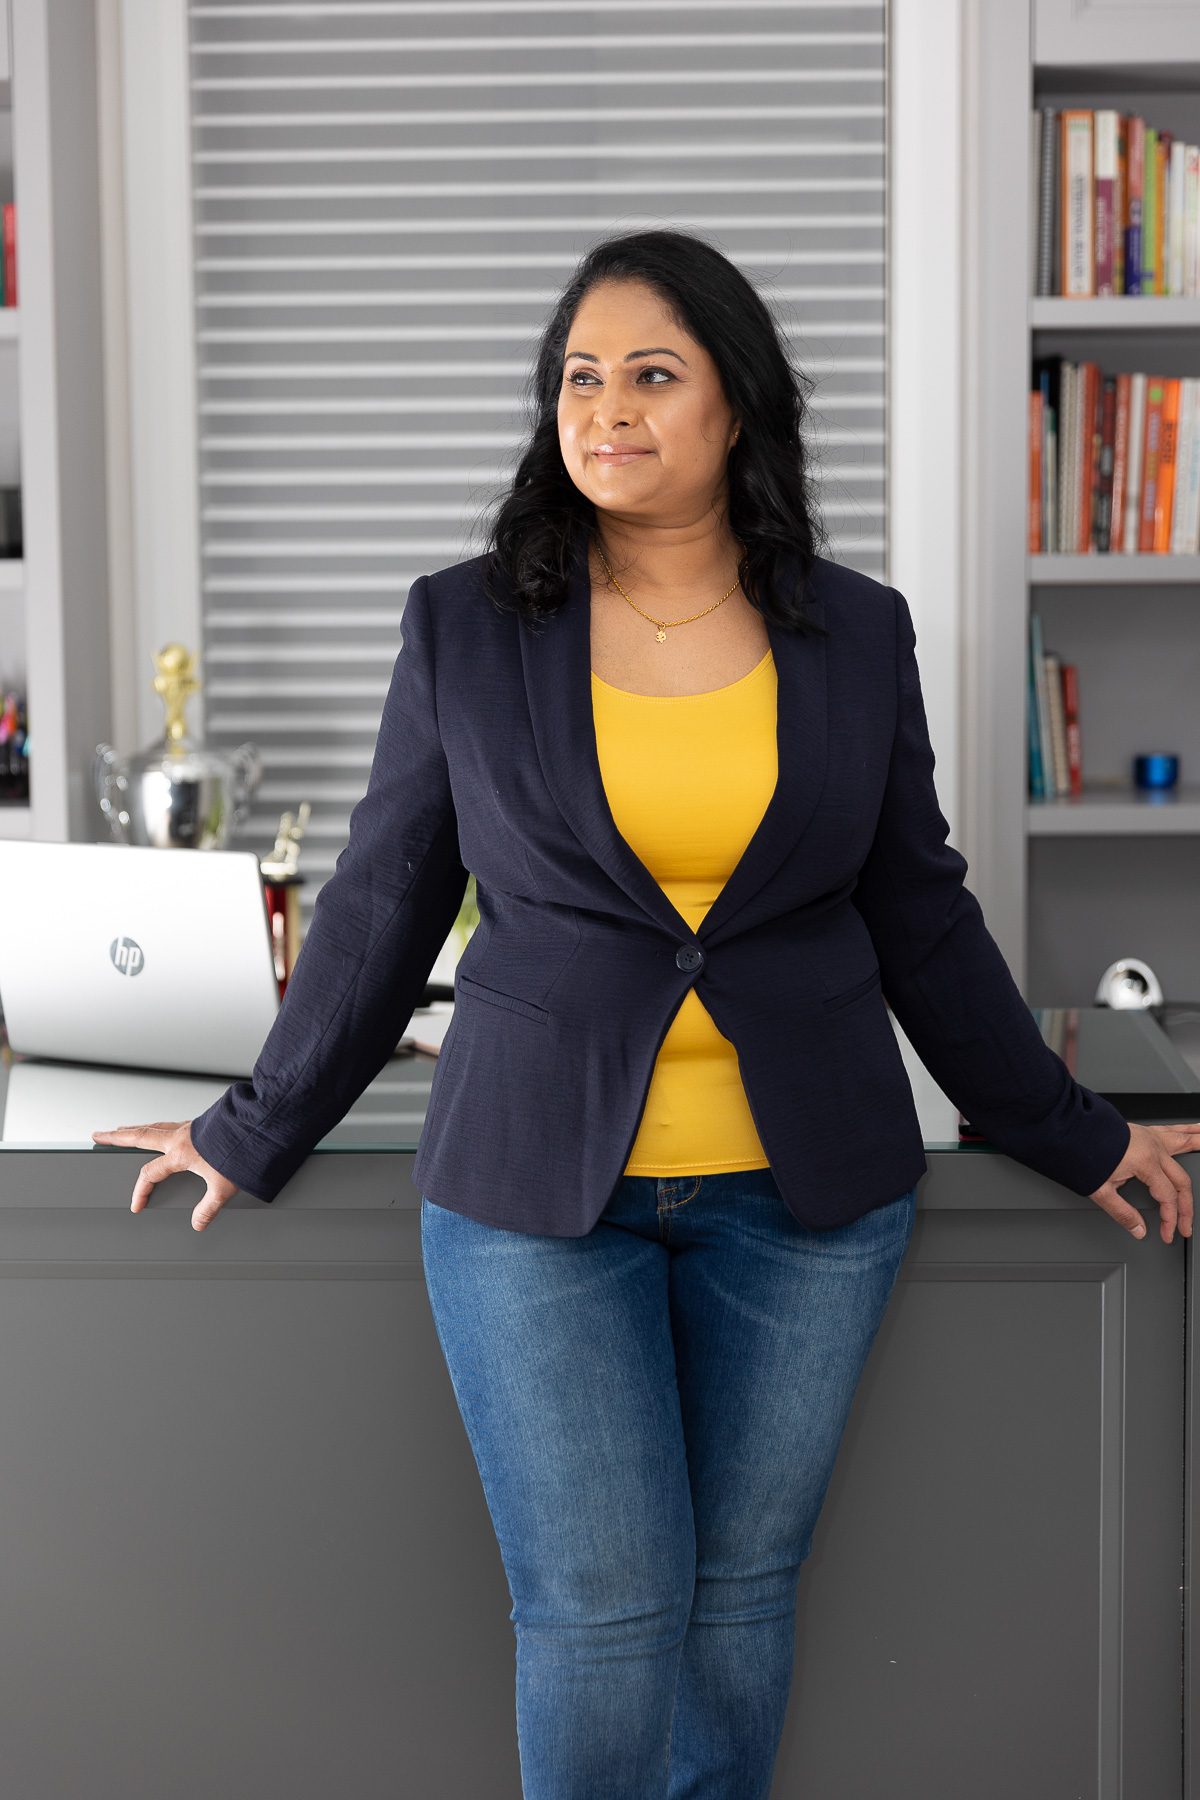 Kalinie, founder of Conscious Empowerment in her office wearing a blazer, jeans, and yellow shirt. She looks pensive and calm.